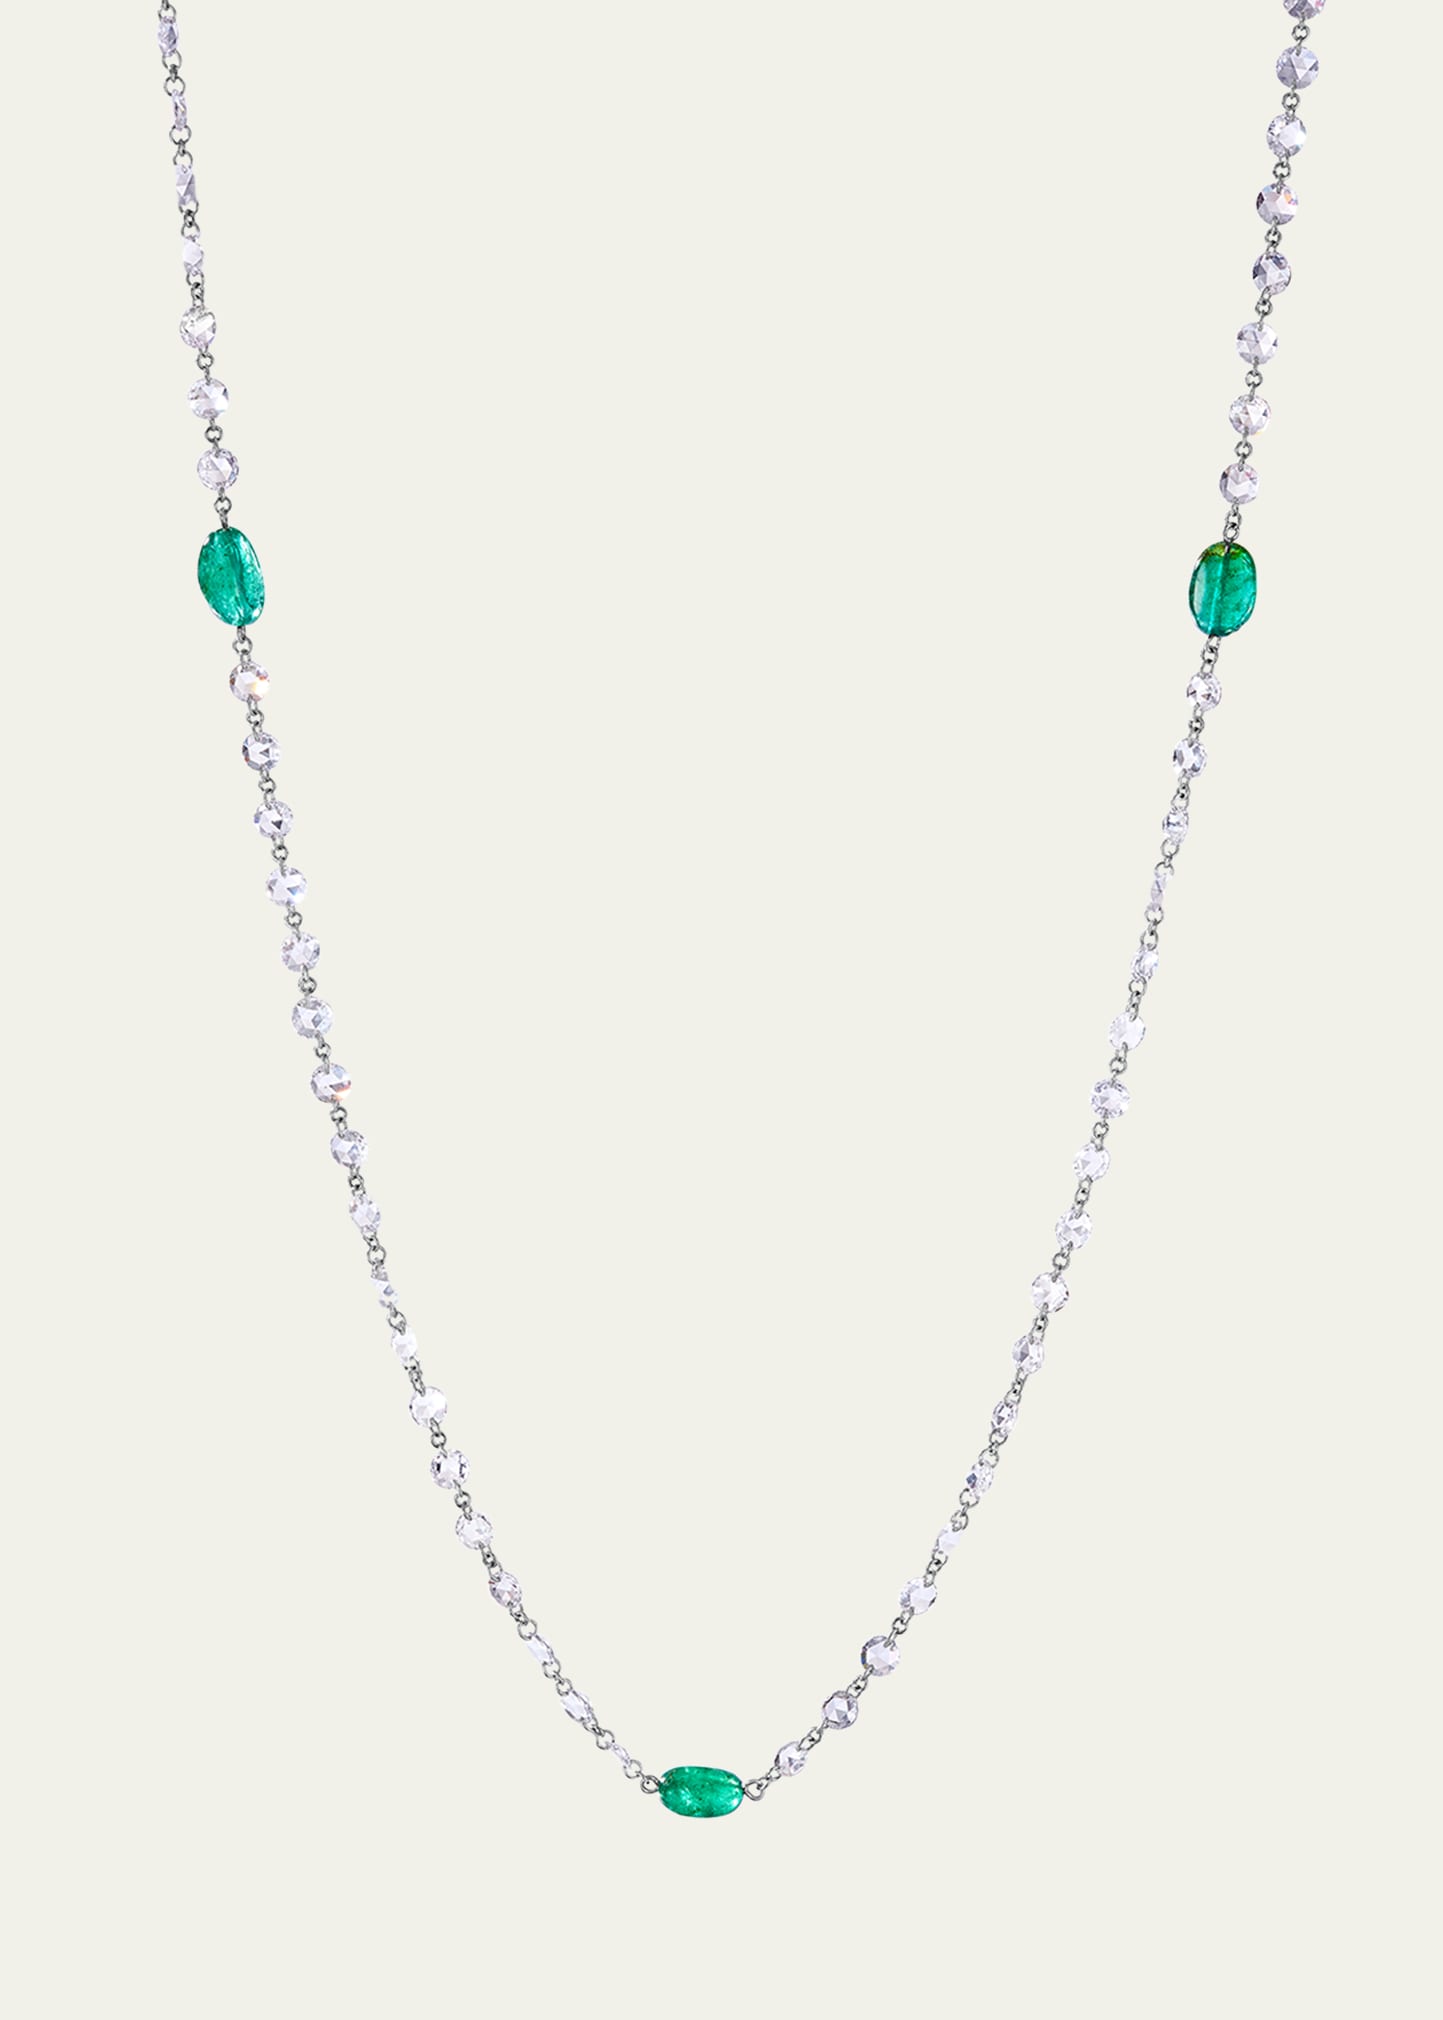 64 Facets Platinum Necklace With Diamonds And Emerald Beads